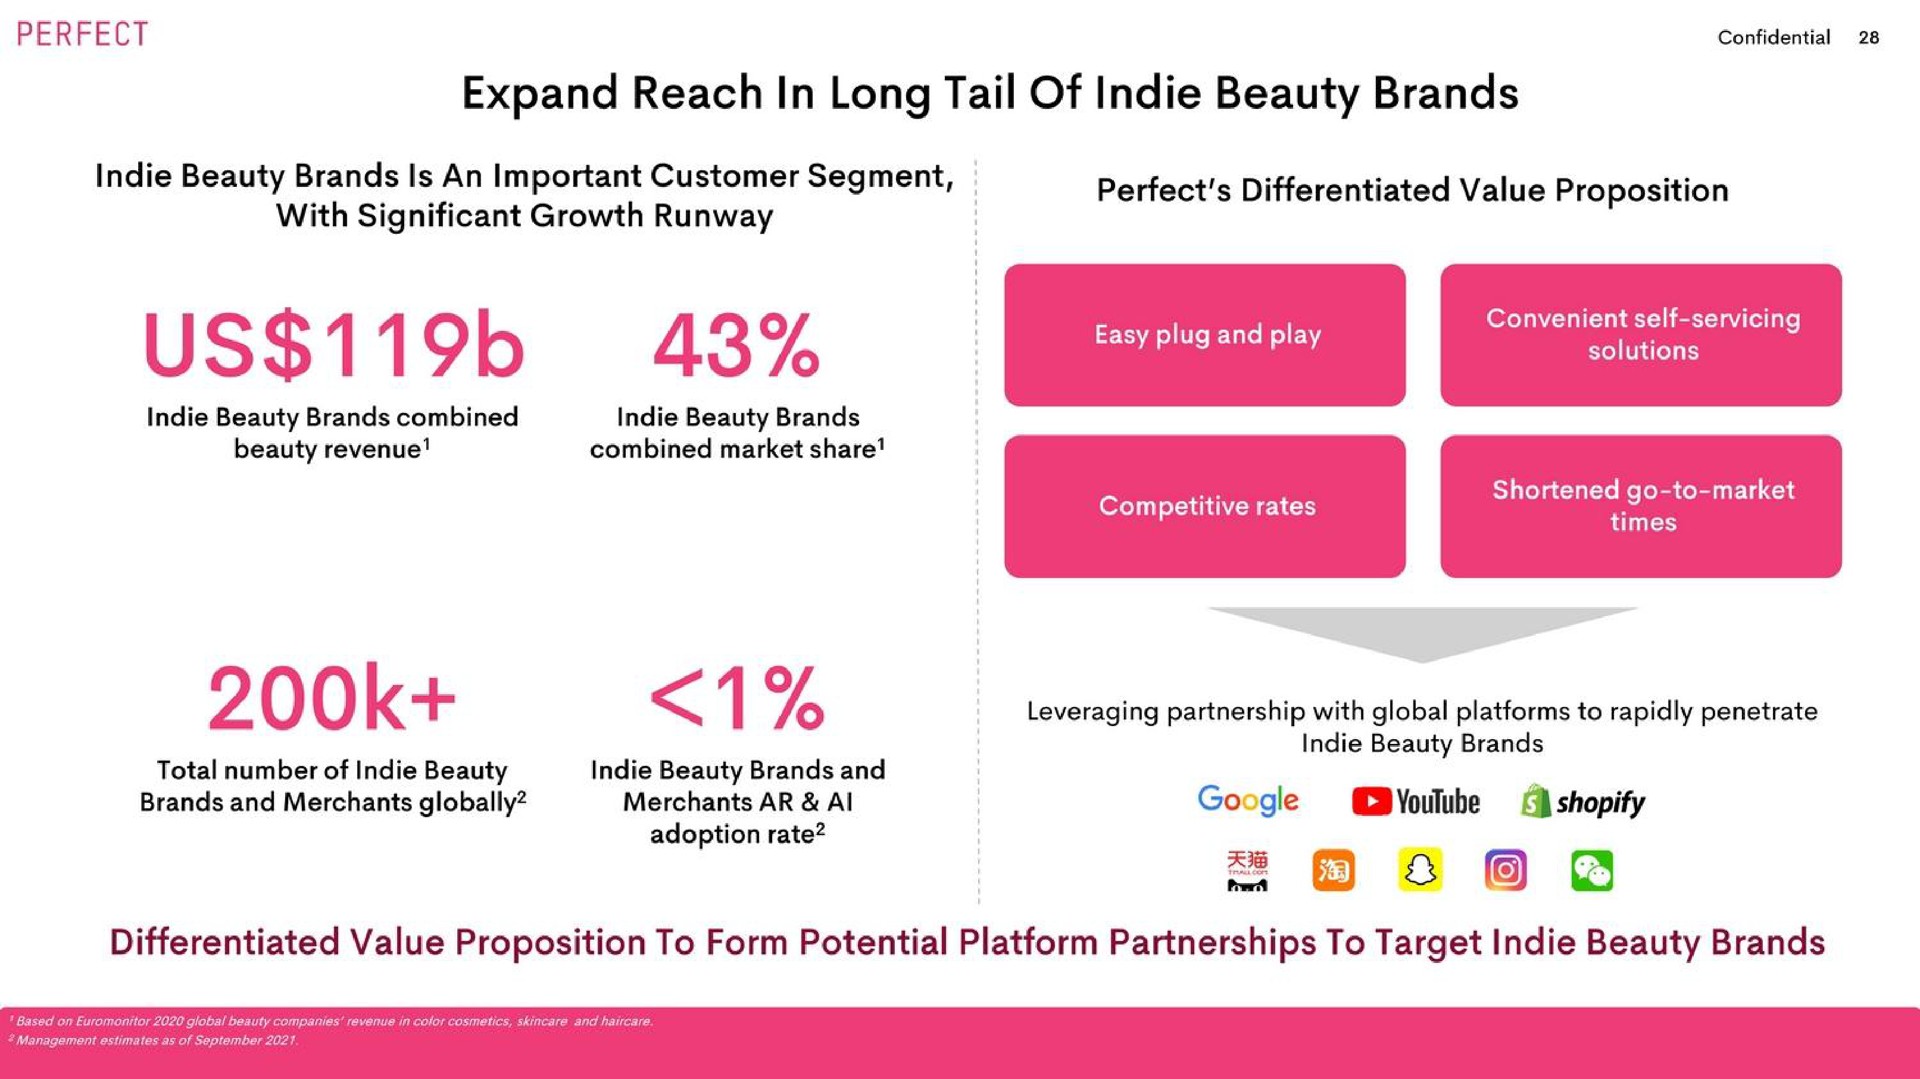 expand reach in long tail of beauty brands us i differentiated value proposition to form potential platform partnerships to target beauty brands | Perfect